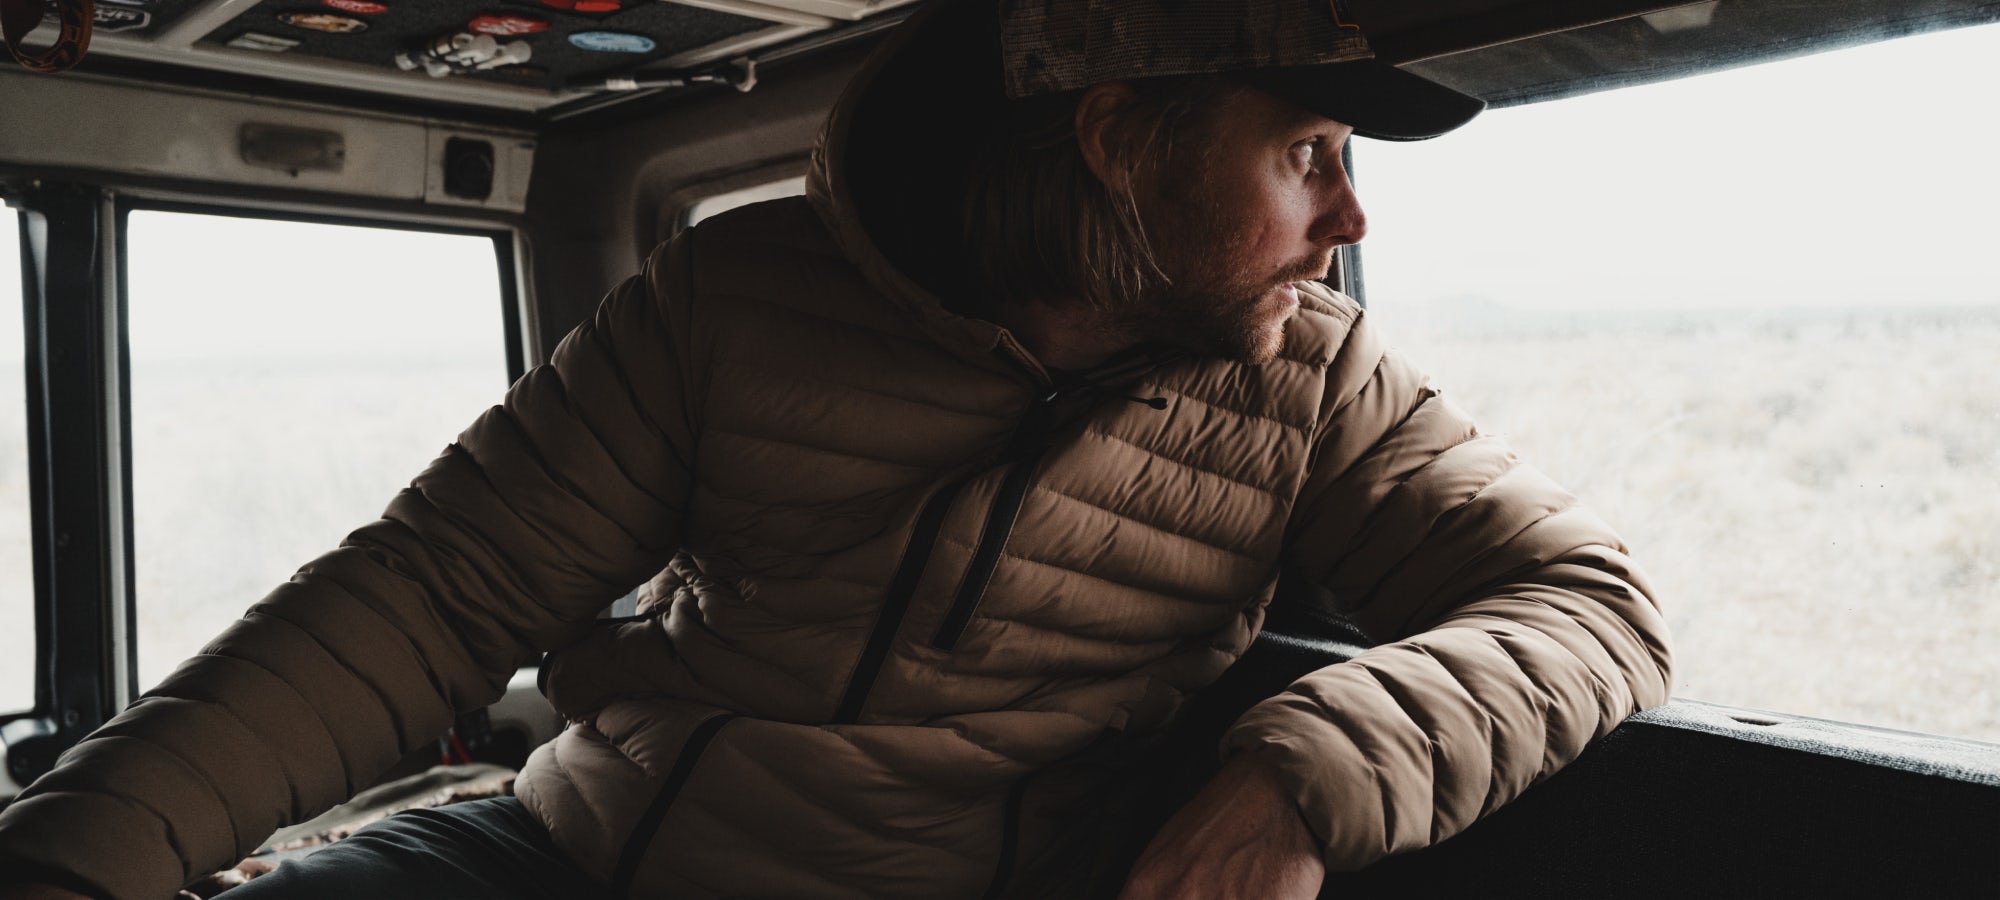 The Rover Down Jacket in Tobacco | SITKA Gear